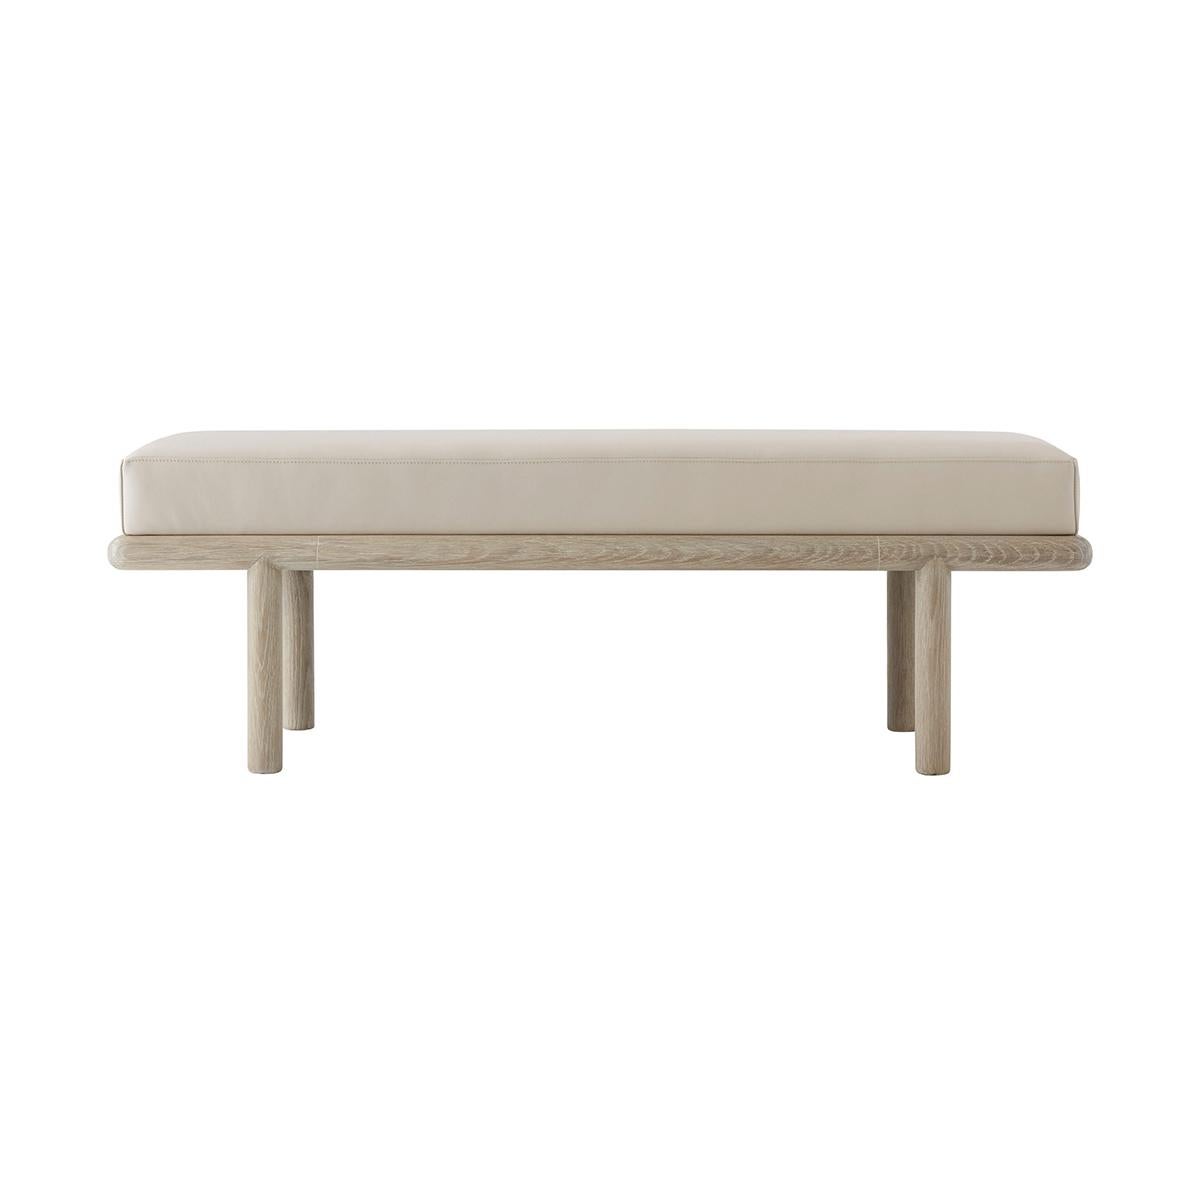 With a boxed leather upholstered cushion, the frame of this naturally designed upholstered bench is skillfully hand-finished with an intensive multi-step process, resulting in a beautifully brushed type of finish making the visible grain from the